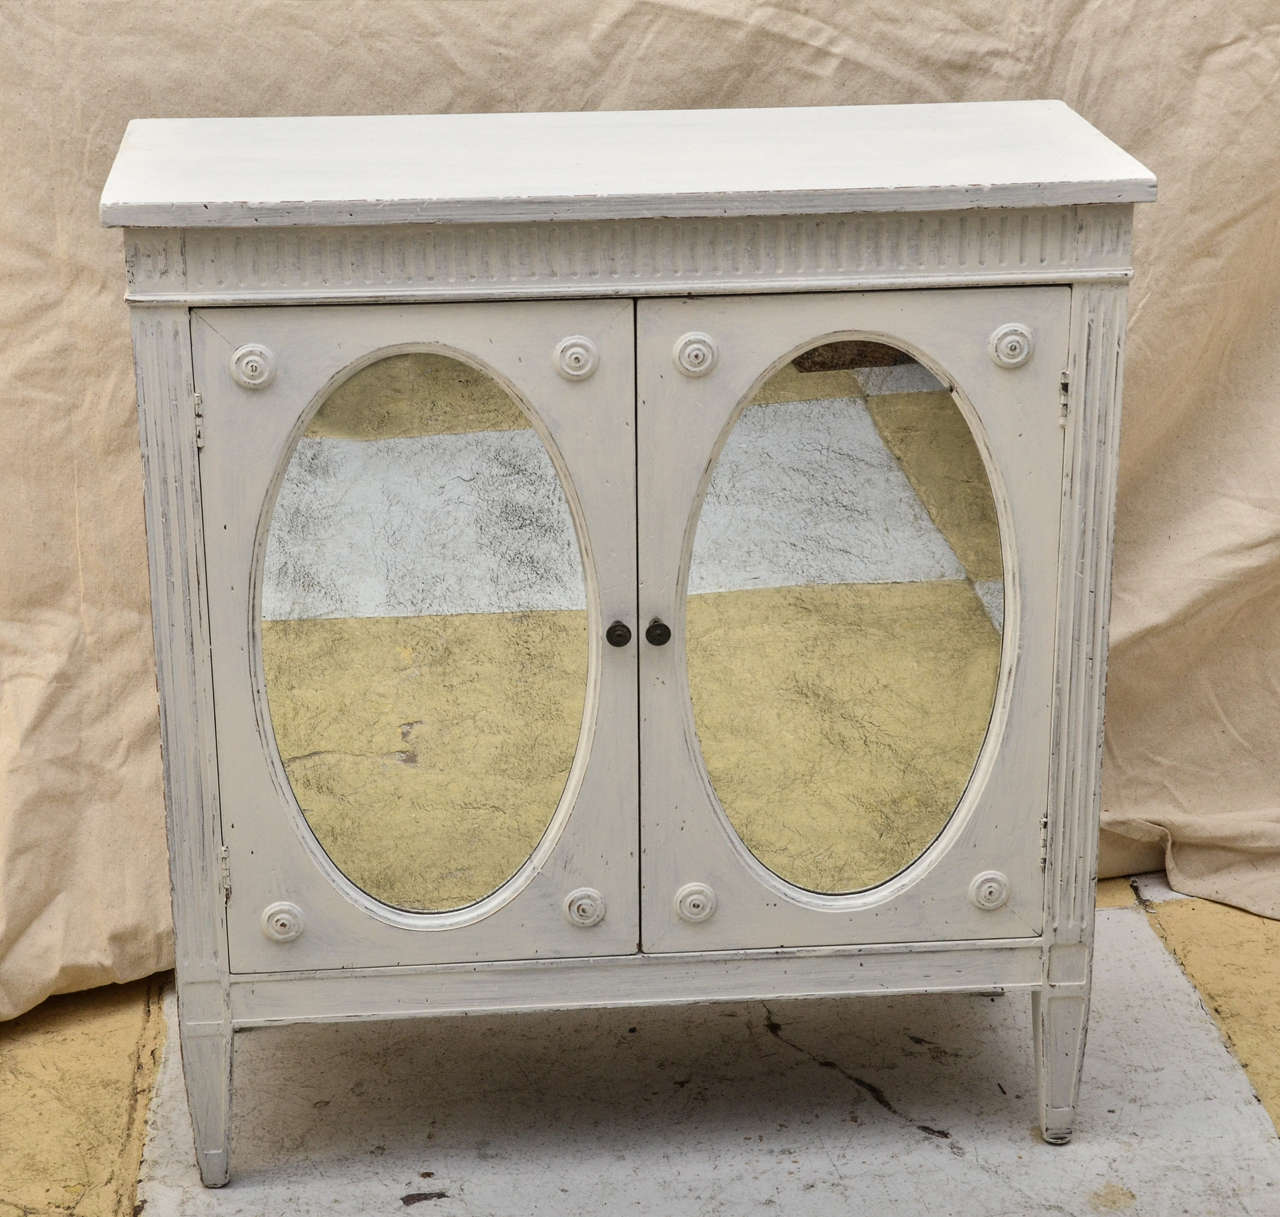 Gustavian Style Pale Grey/White Painted Antiqued Oval Paneled Doors With Inset Antiqued Mirrors. Each Doors Has Round Turned Discs In The Corners. The Top Frieze & Front Of Sides Has Incised Fluting. The Cabinet Is Supported By 4 Tapered Legs. Very